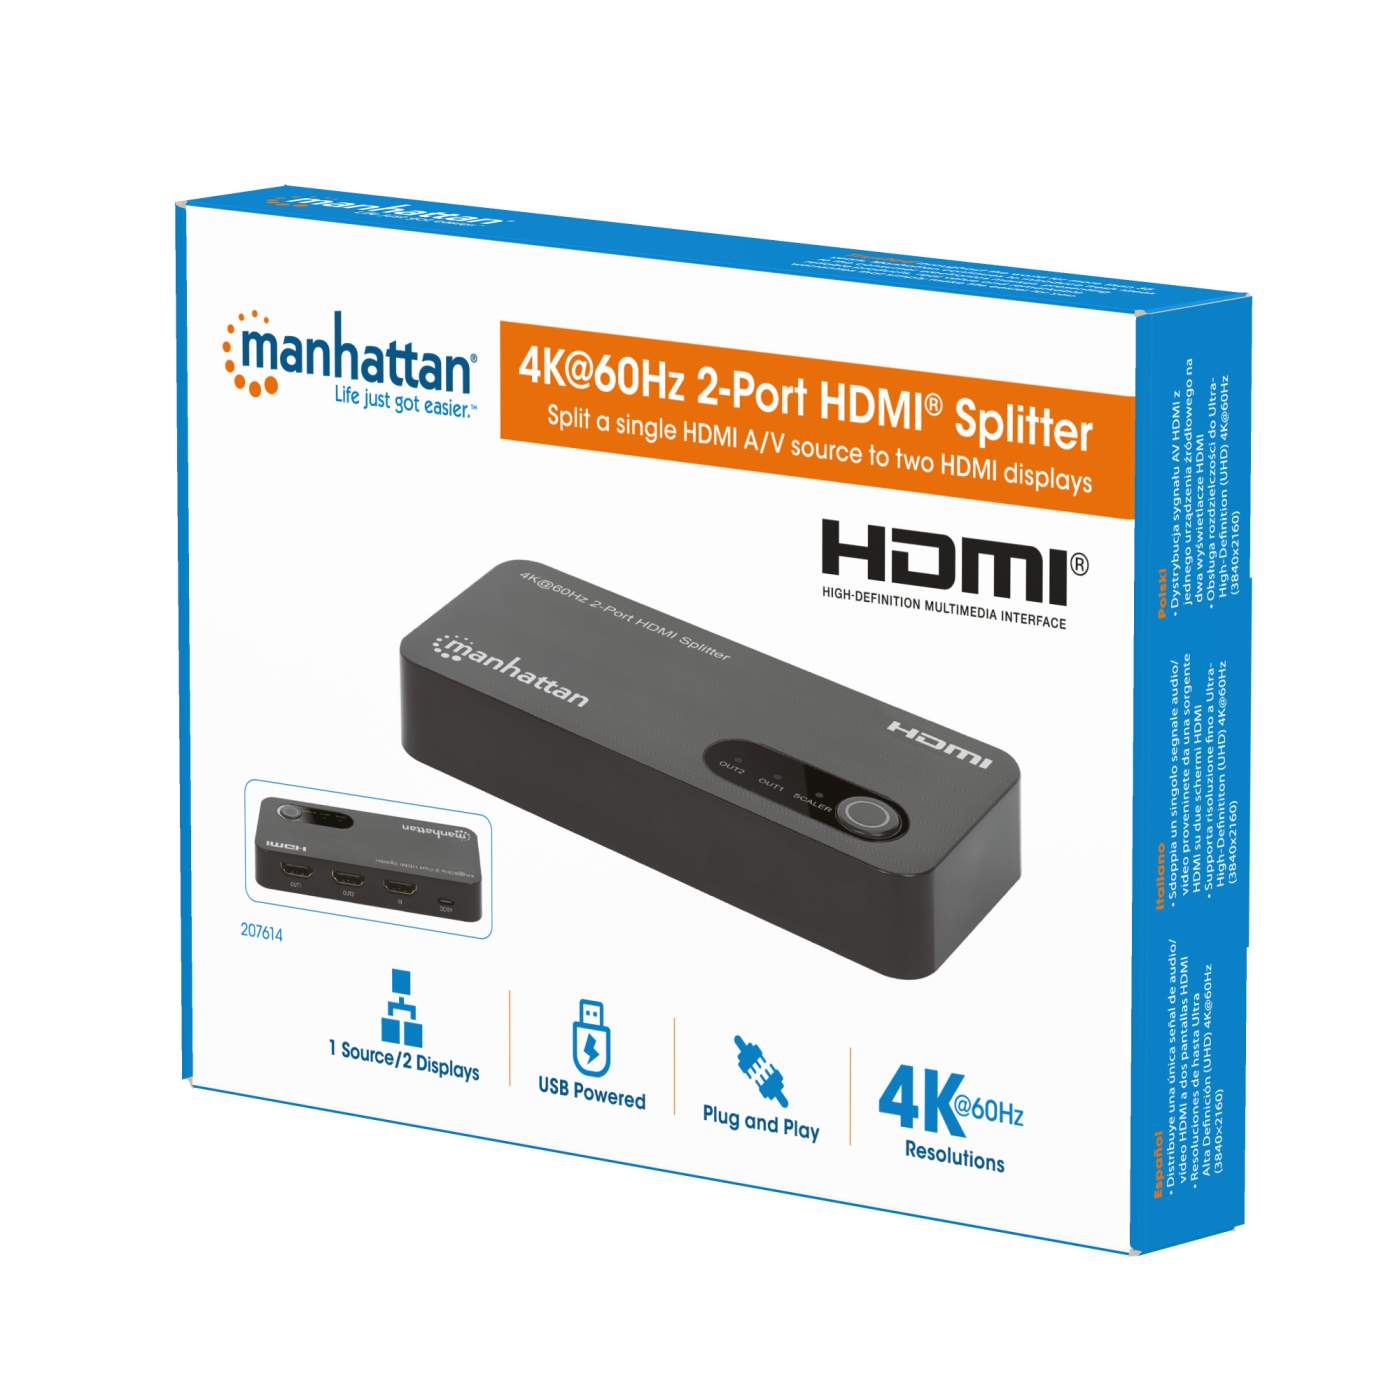 4K@60Hz 2-Port HDMI Splitter with Downscaling Packaging Image 2